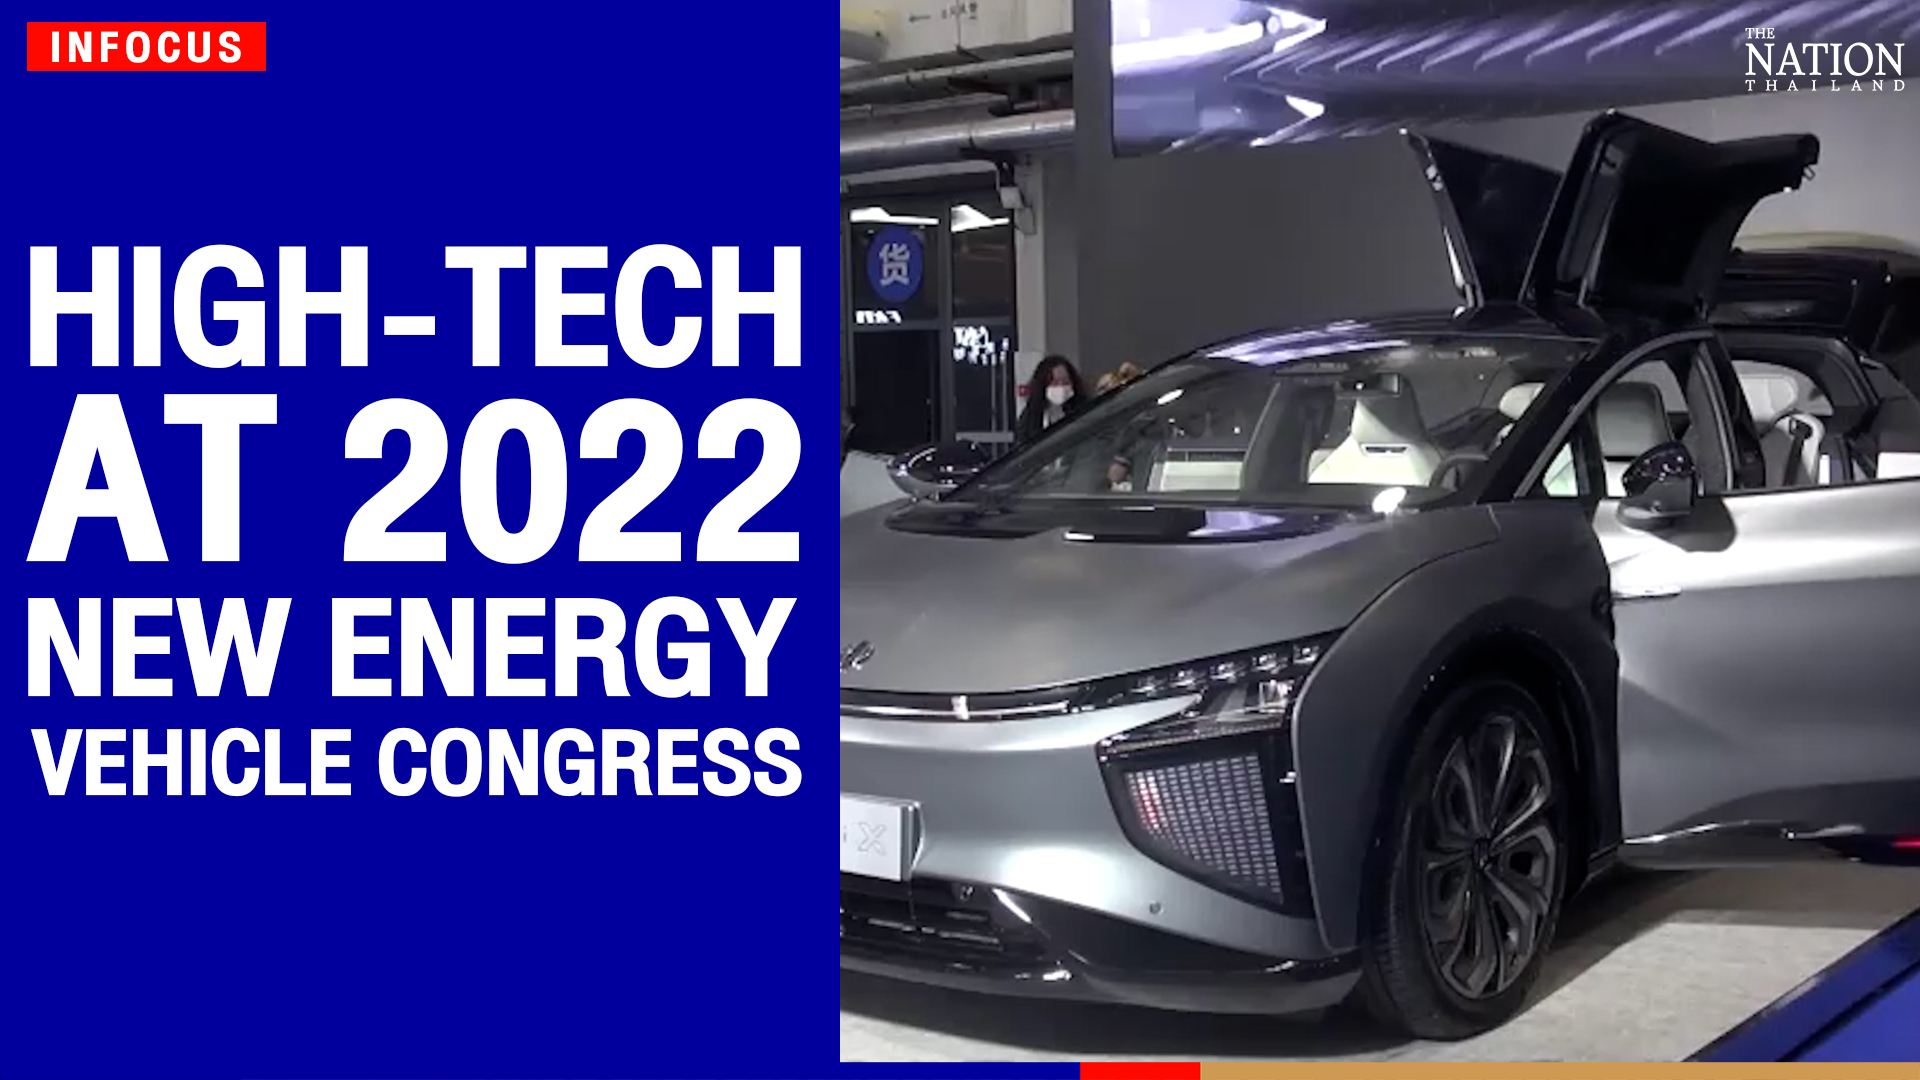 High tech at 2022 World New Energy Vehicle Congress | The Nation